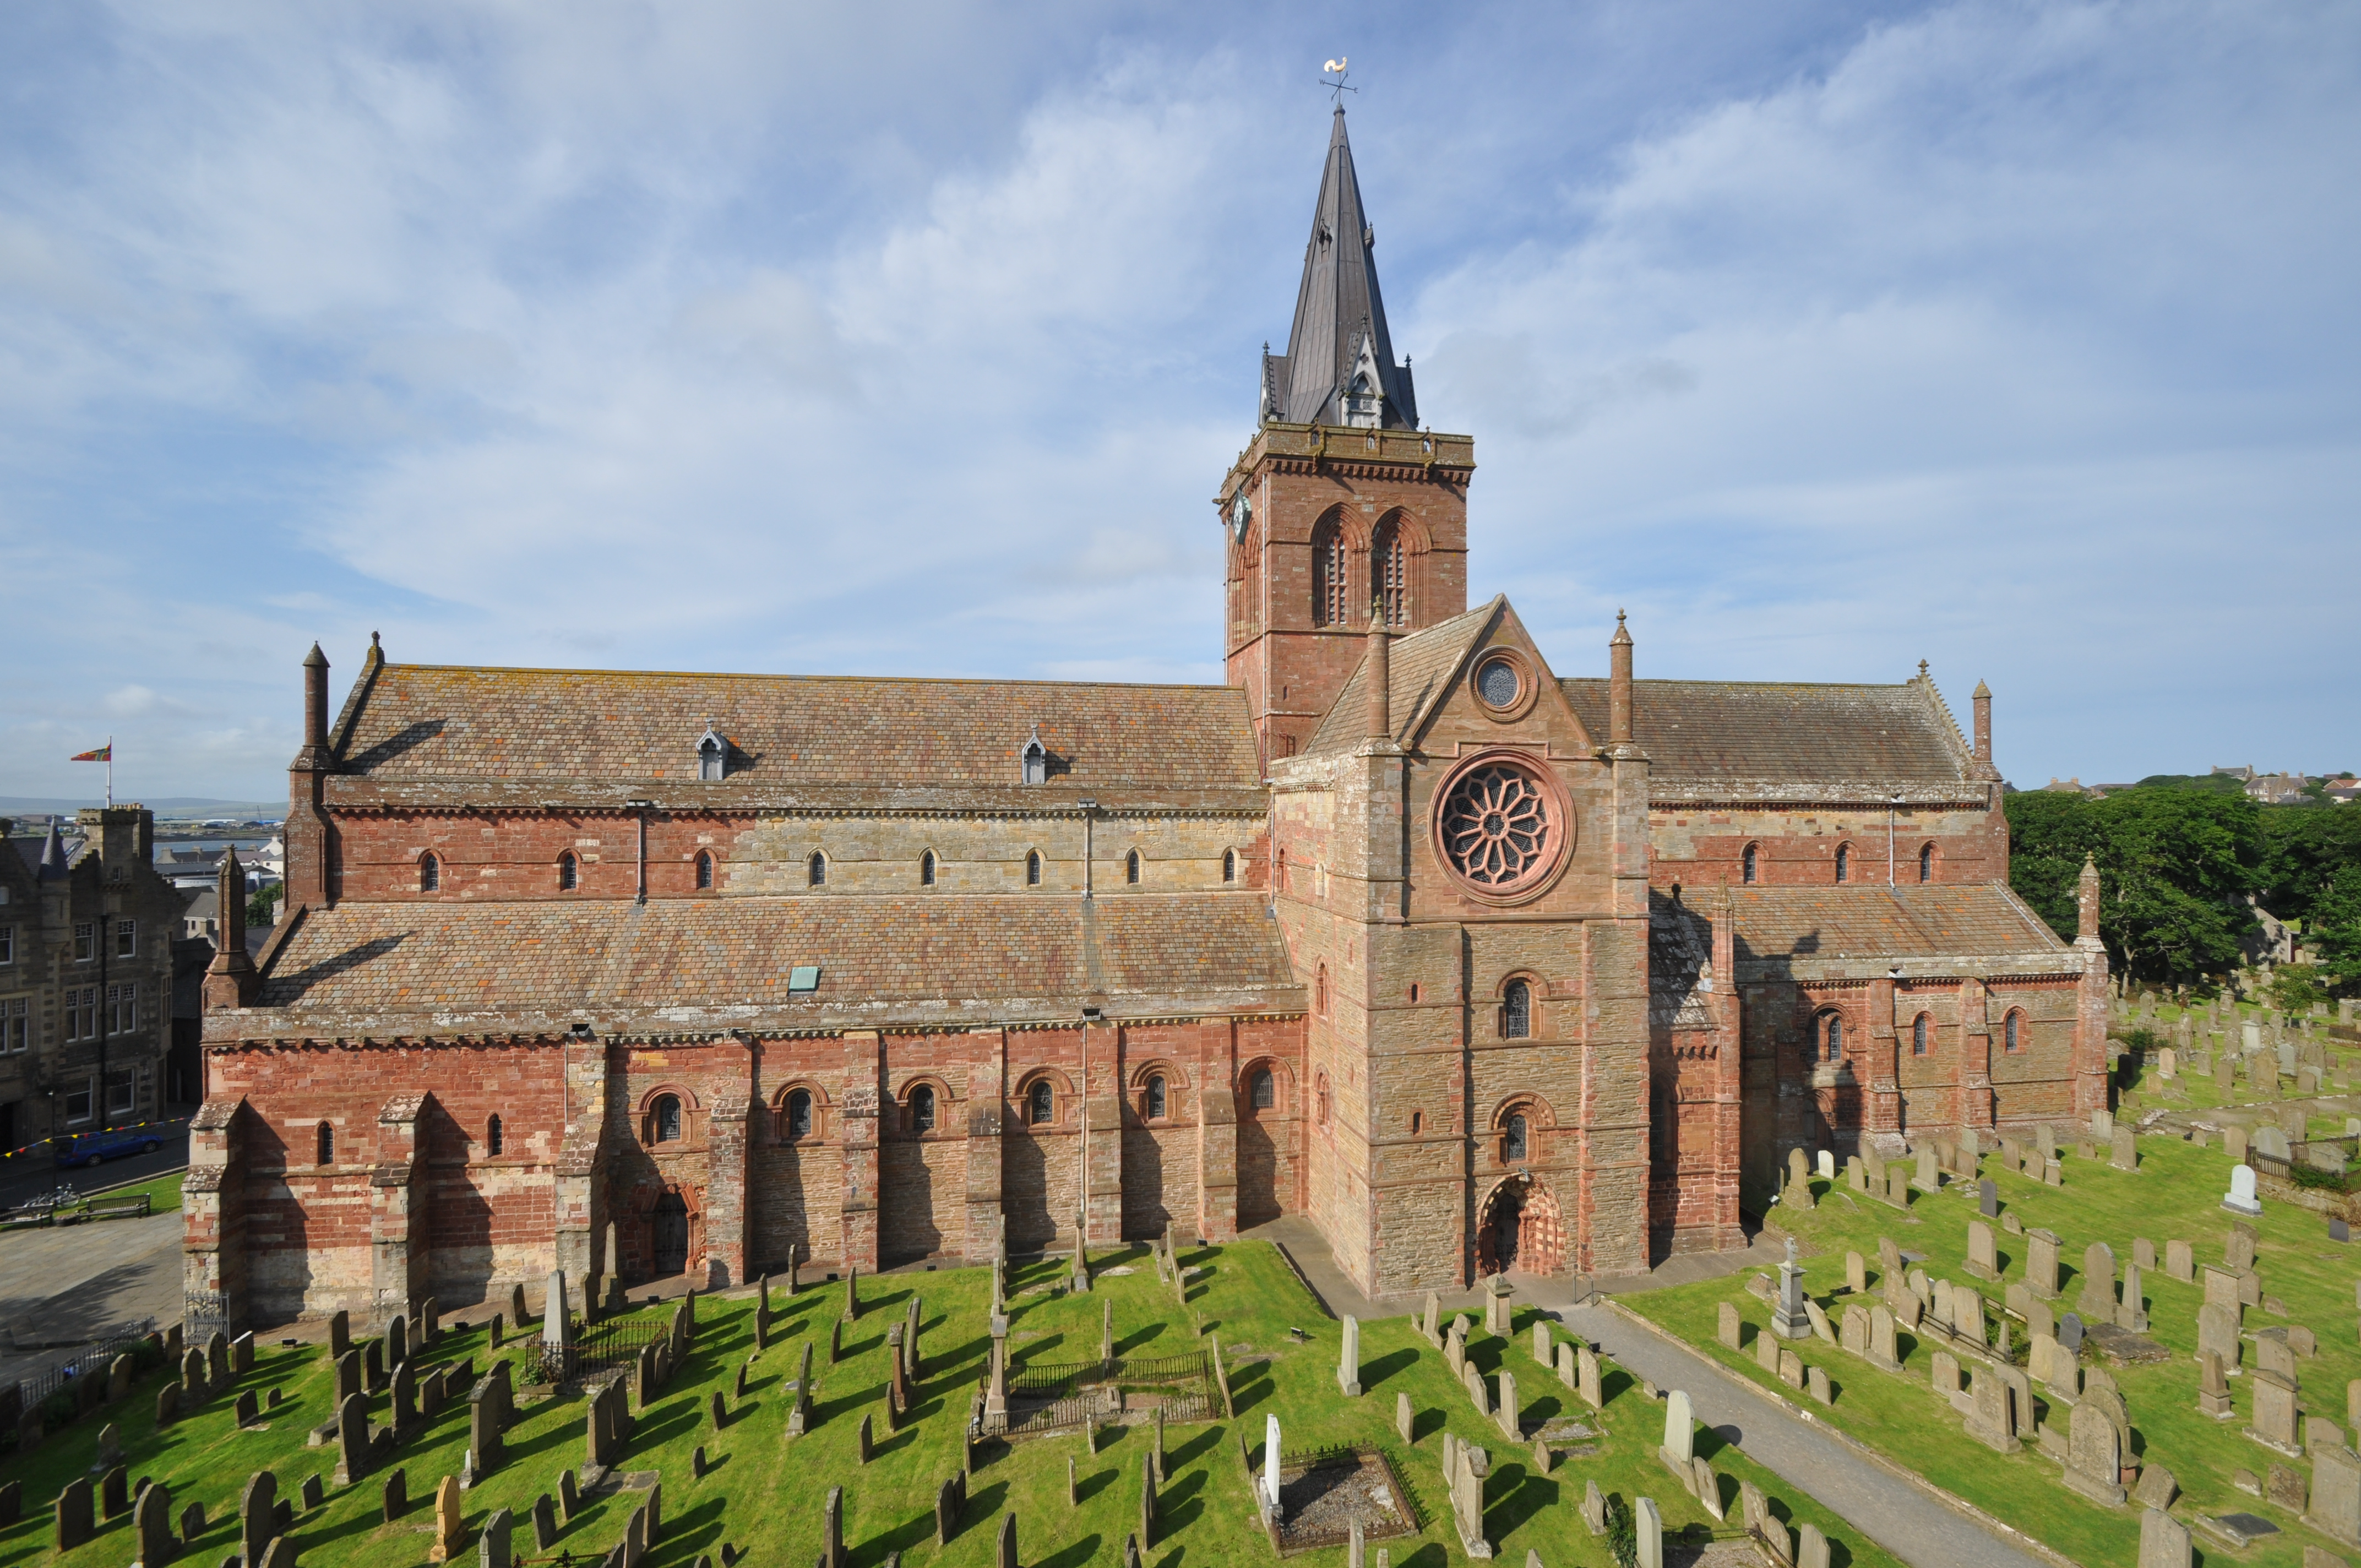 St_Magnus_Cathedral%2C_Kirkwall%2C_viewed_from_the_Bishop%27s_Palace.jpg